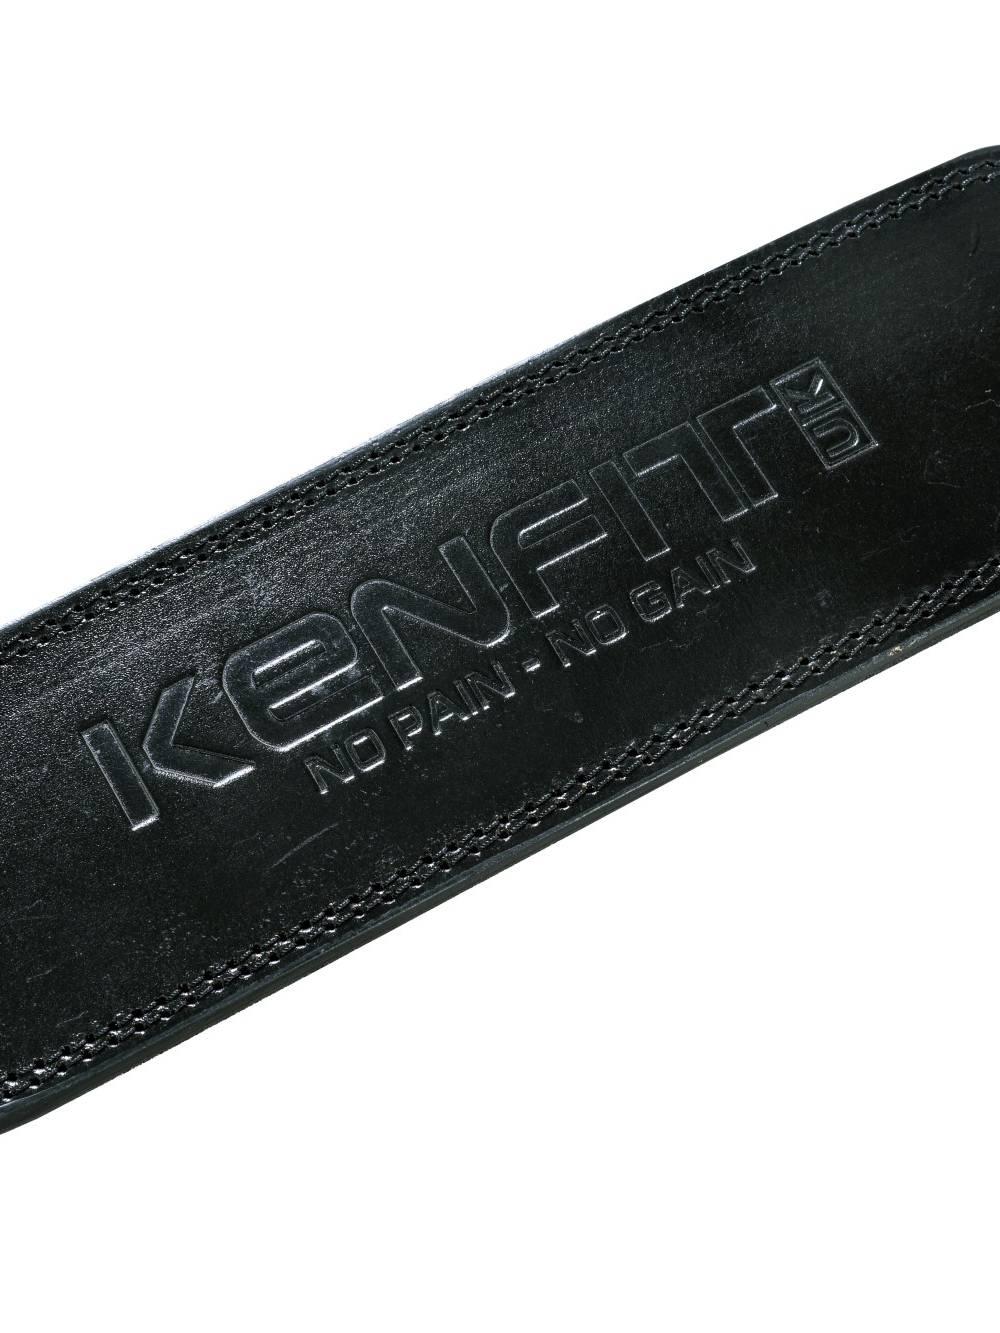 Weight Lifting Buffalo Leather 7mm Embossed Logo Gym Training Belt By KENFIT